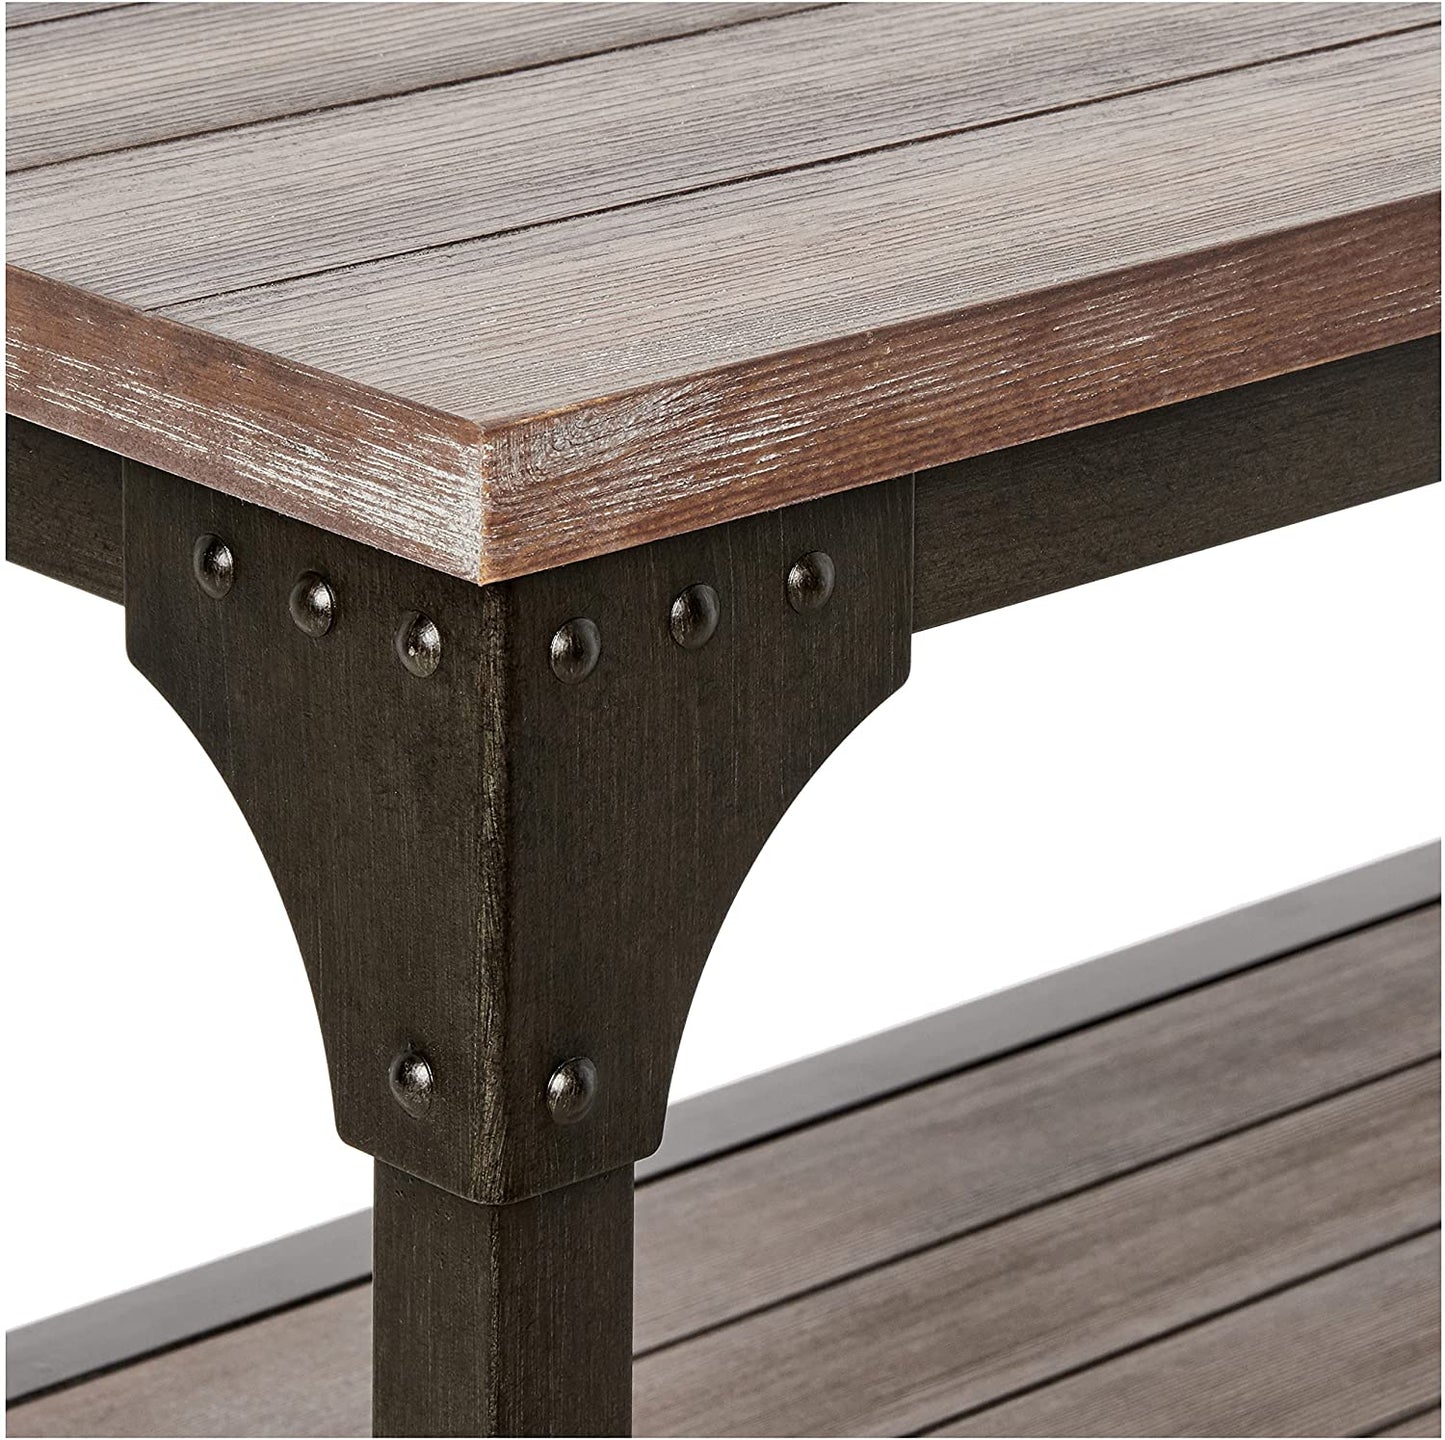 60" Rustic Weathered Oak Console Storage Table